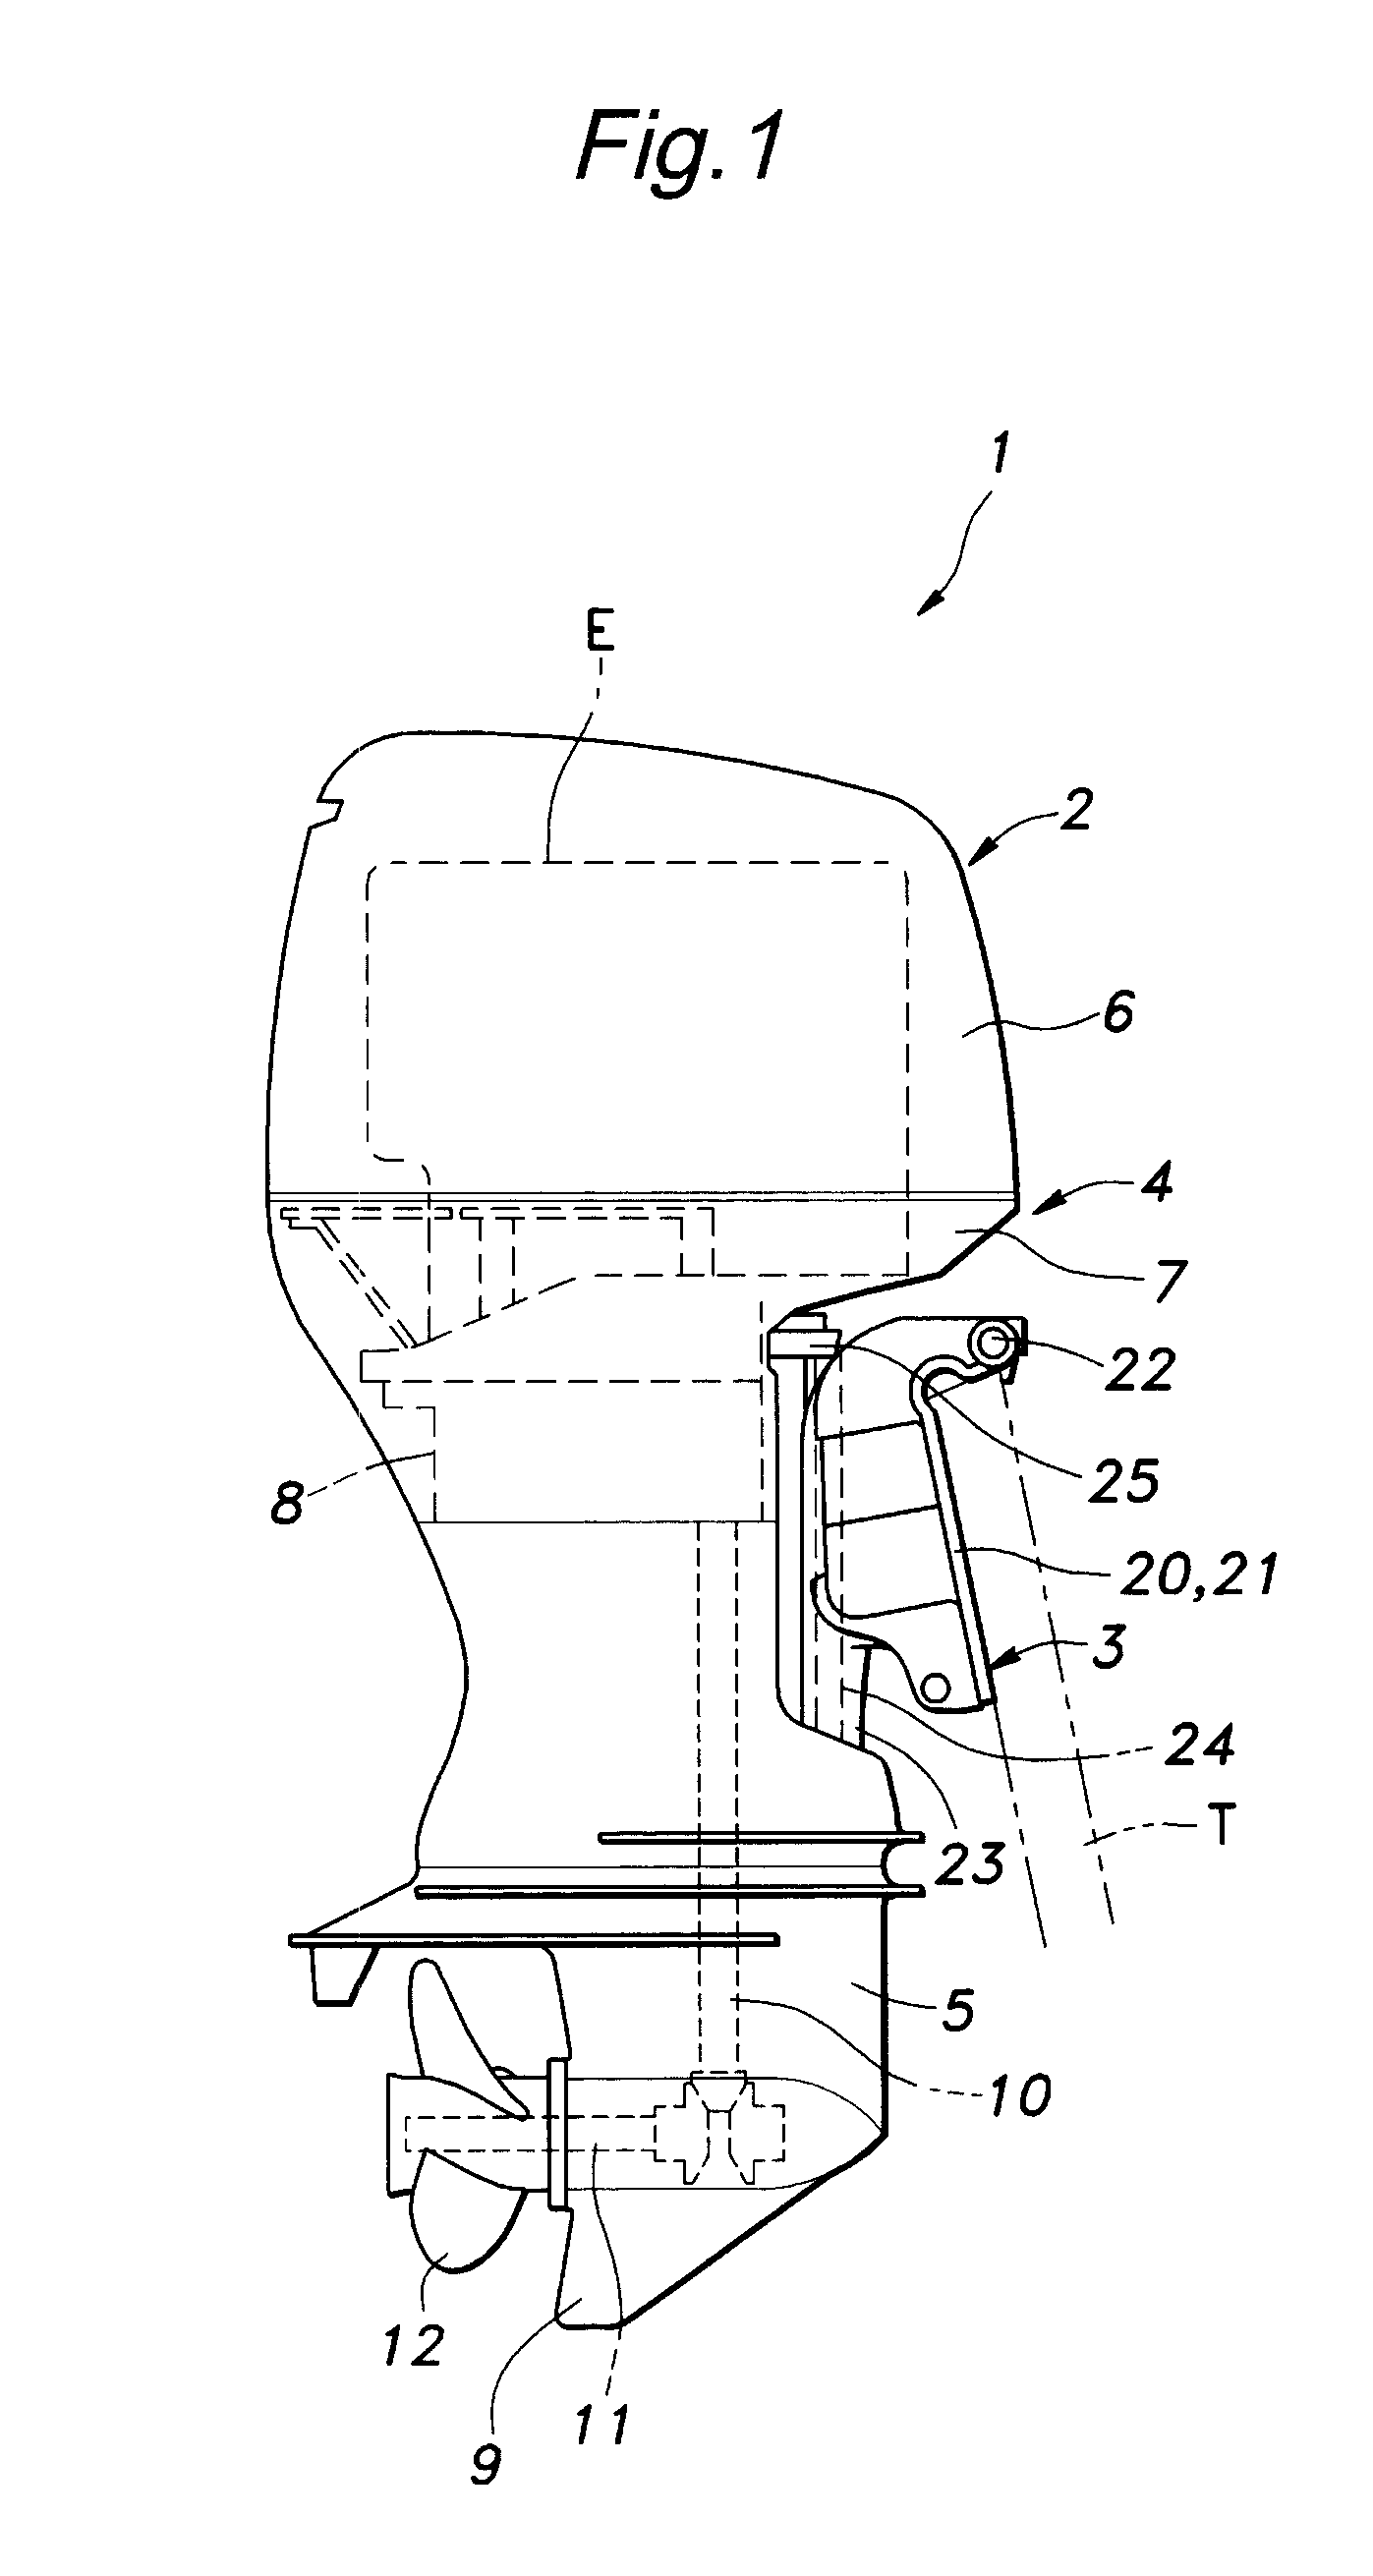 Outboard marine motor that allows a large steering angle